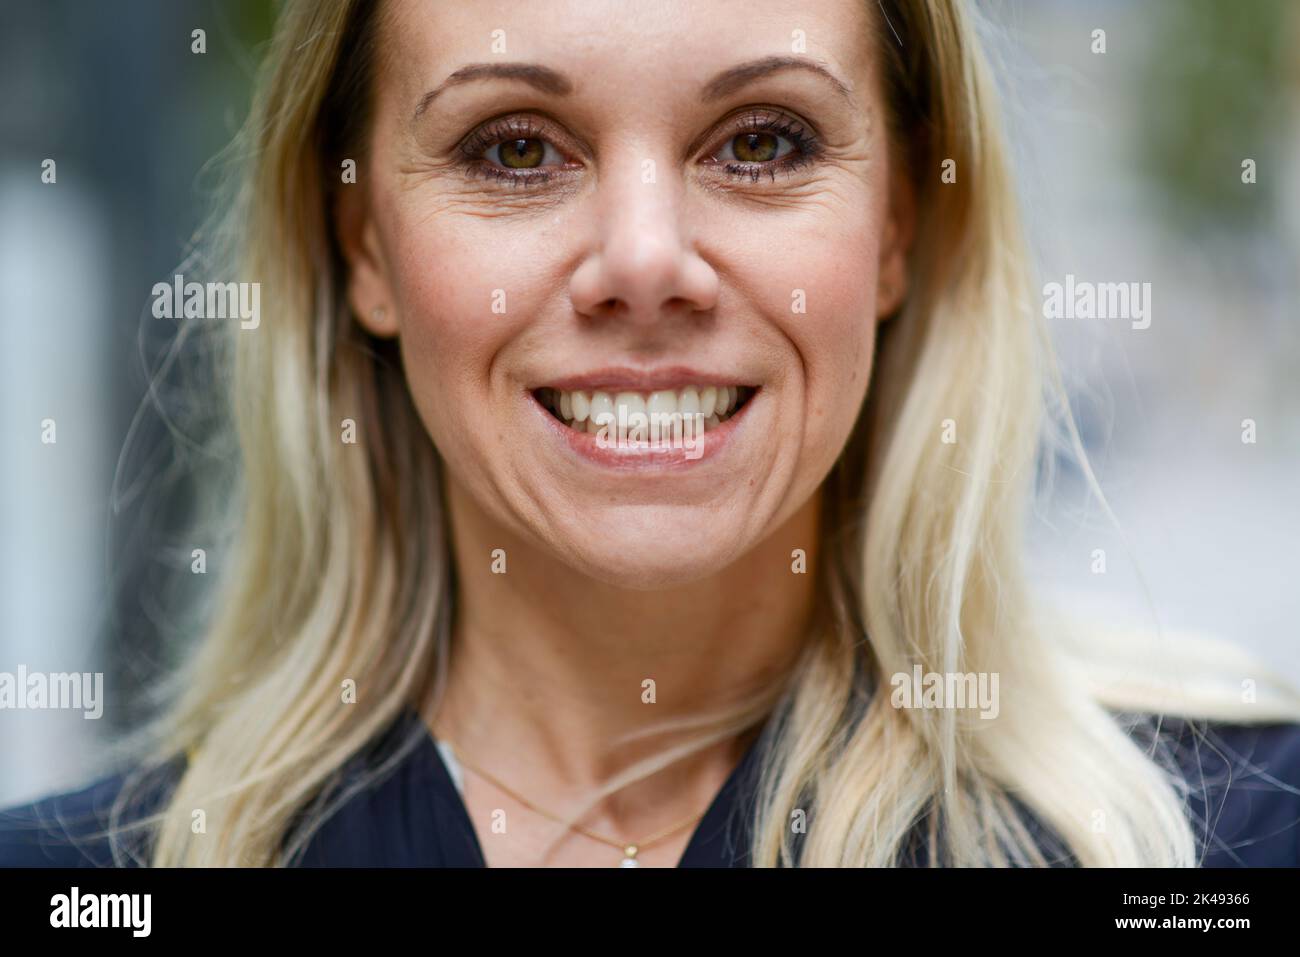 Close up of an attractive middle aged blond woman with an extremely wide and bright smile showing her teeth Stock Photo